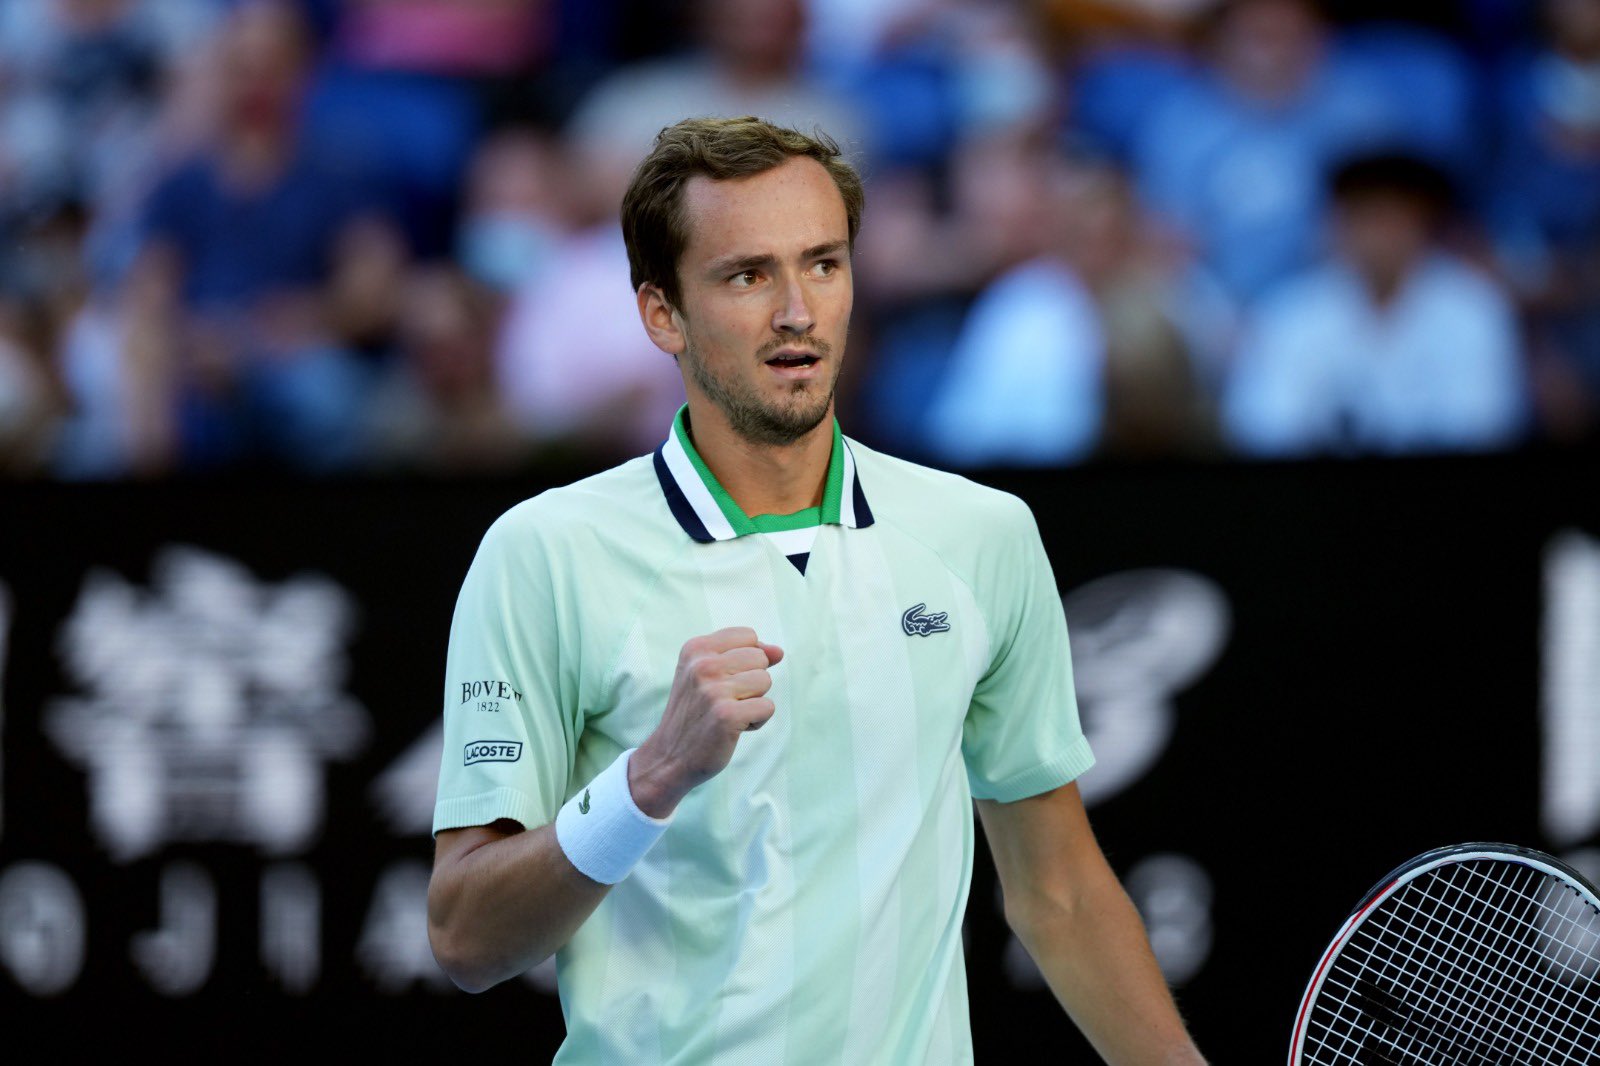 Medvedev vs Cressy LIVE: Target World No 1 & Aus Open title, Daniil Medvedev faces America's Maxime Cressy in Rd 4- Follow LIVE updates